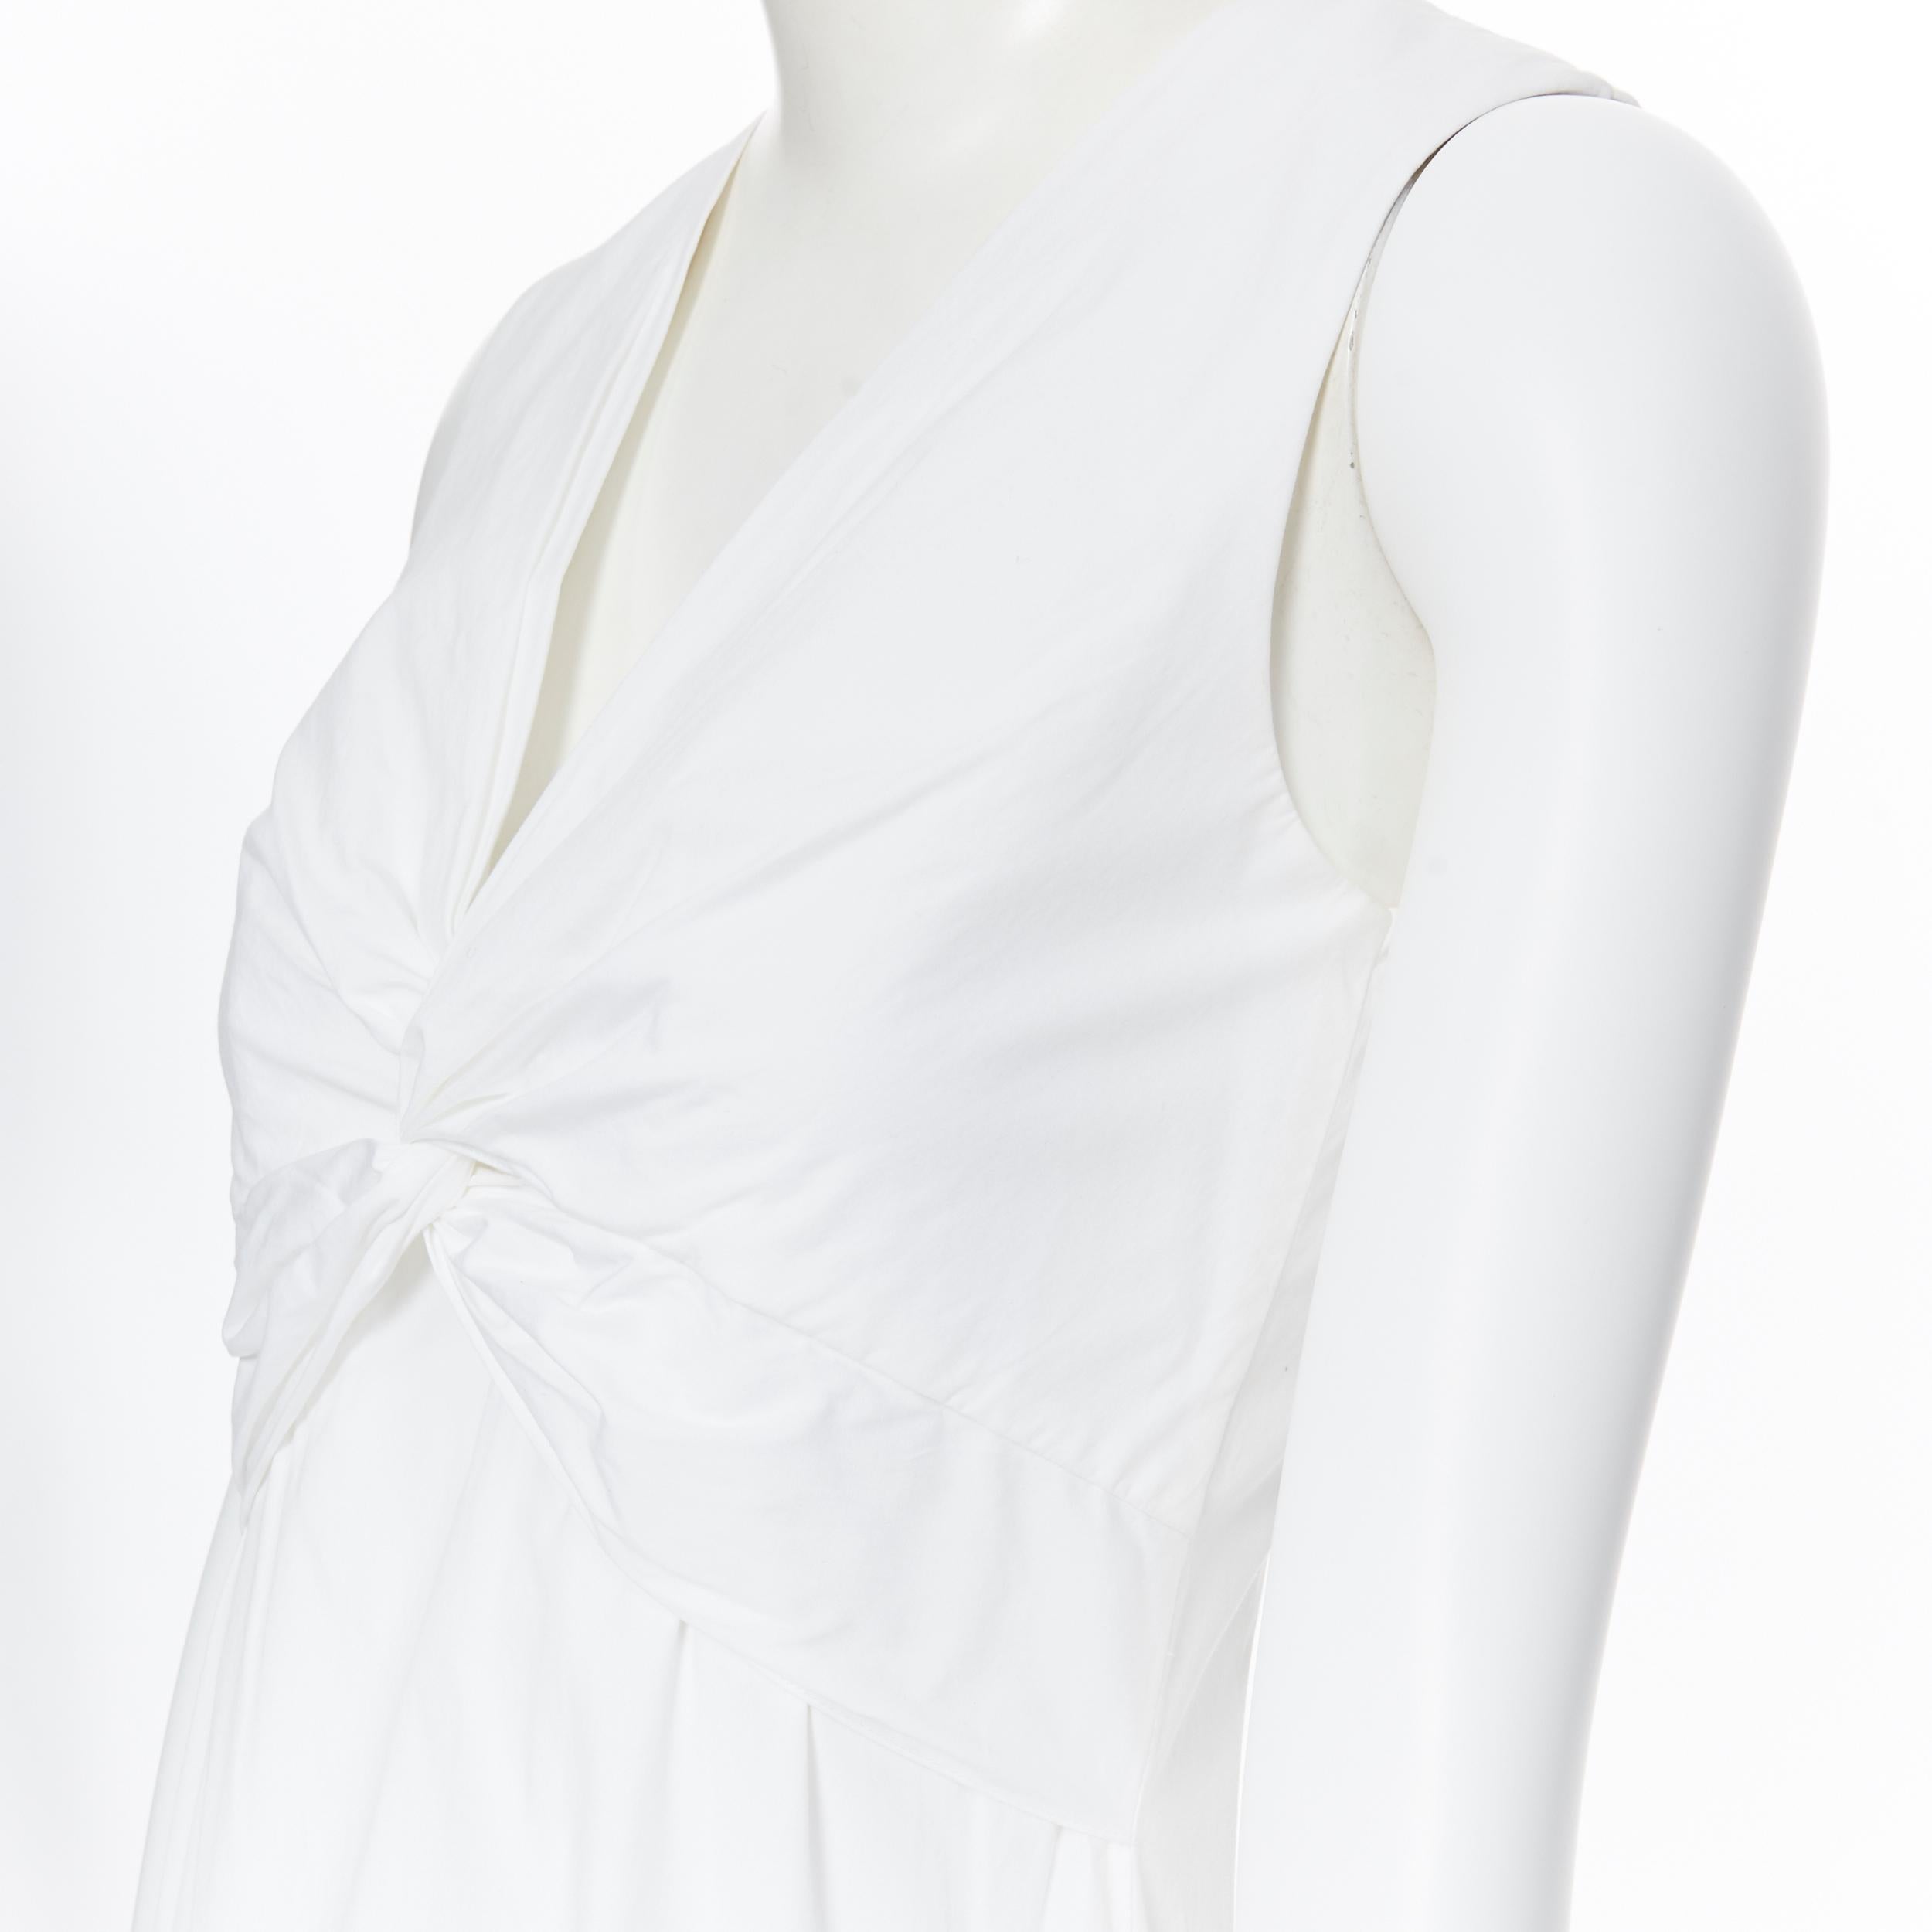 THE ROW white cotton blend draped knot bust V-neck minimal maxi dress US0
Brand: The Row
Model Name / Style: Day dress
Material: Cotton blend
Color: White
Pattern: Solid
Extra Detail: Knotted draped bust. Pull on dress. Sleeveless. V-neck